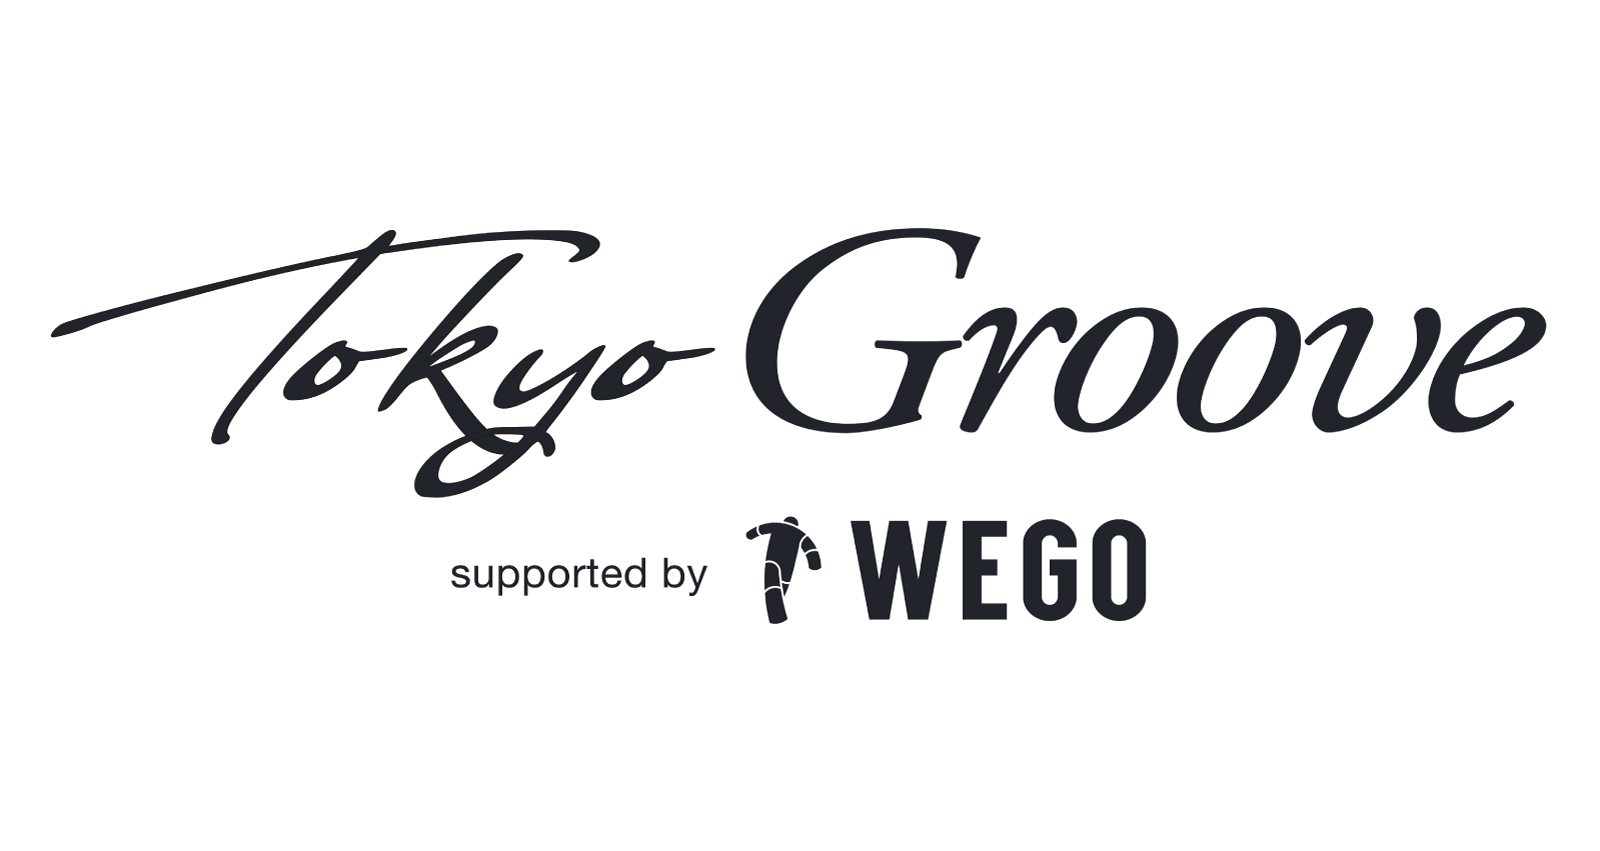 “TokyoGroove” supported by WEGO